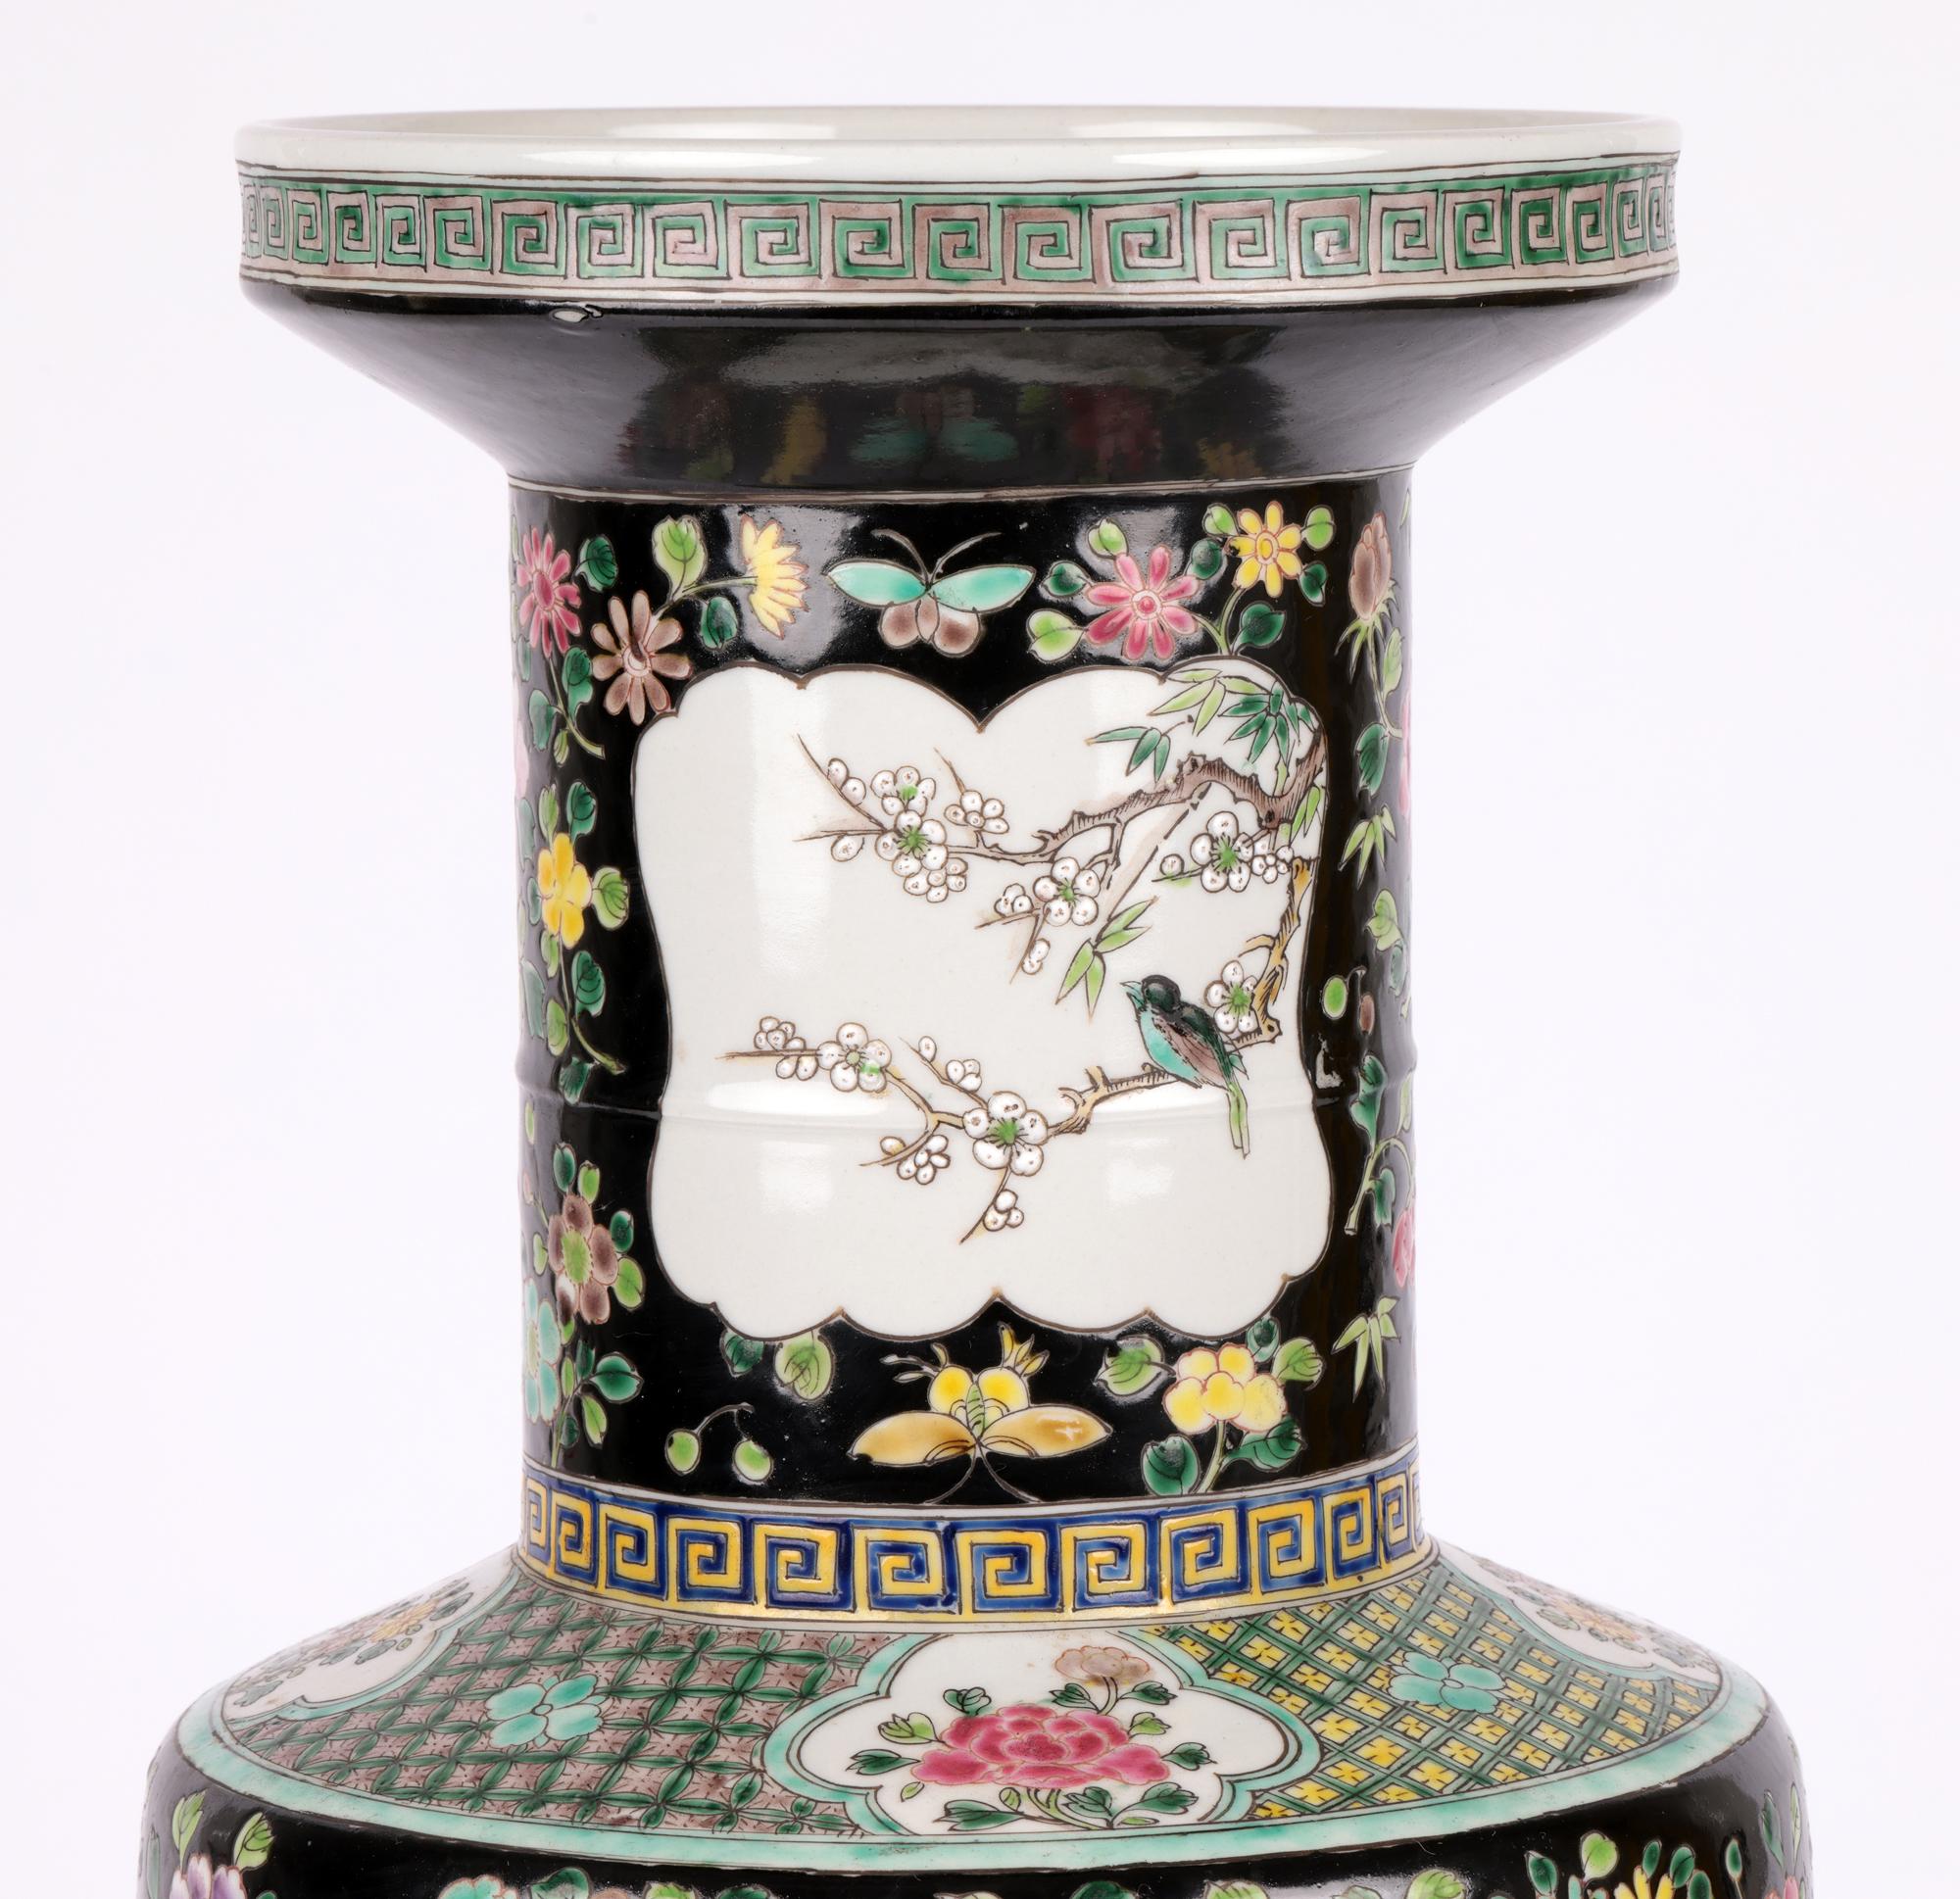 A large and impressive Chinese famille noir porcelain vase hand painted with decorative panels with birds, animals and scholars objects dating from the early to mid-20th century. The tall rouleau shaped vase stands on a narrow round unglazed foot